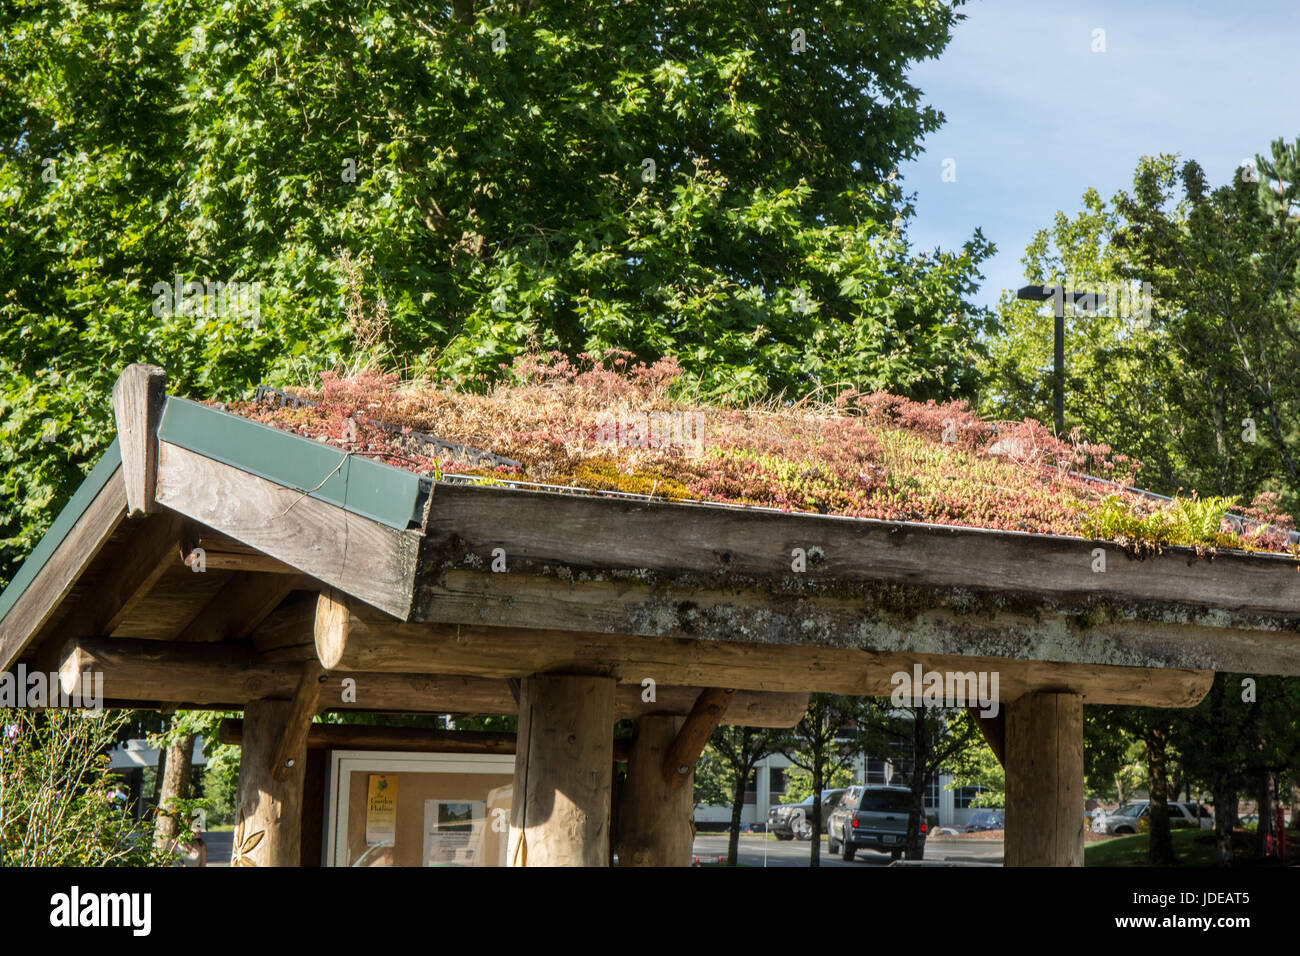 Living or green roof at the Cedar River Watershed Education Center in North Bend, Washington, USA Stock Photo